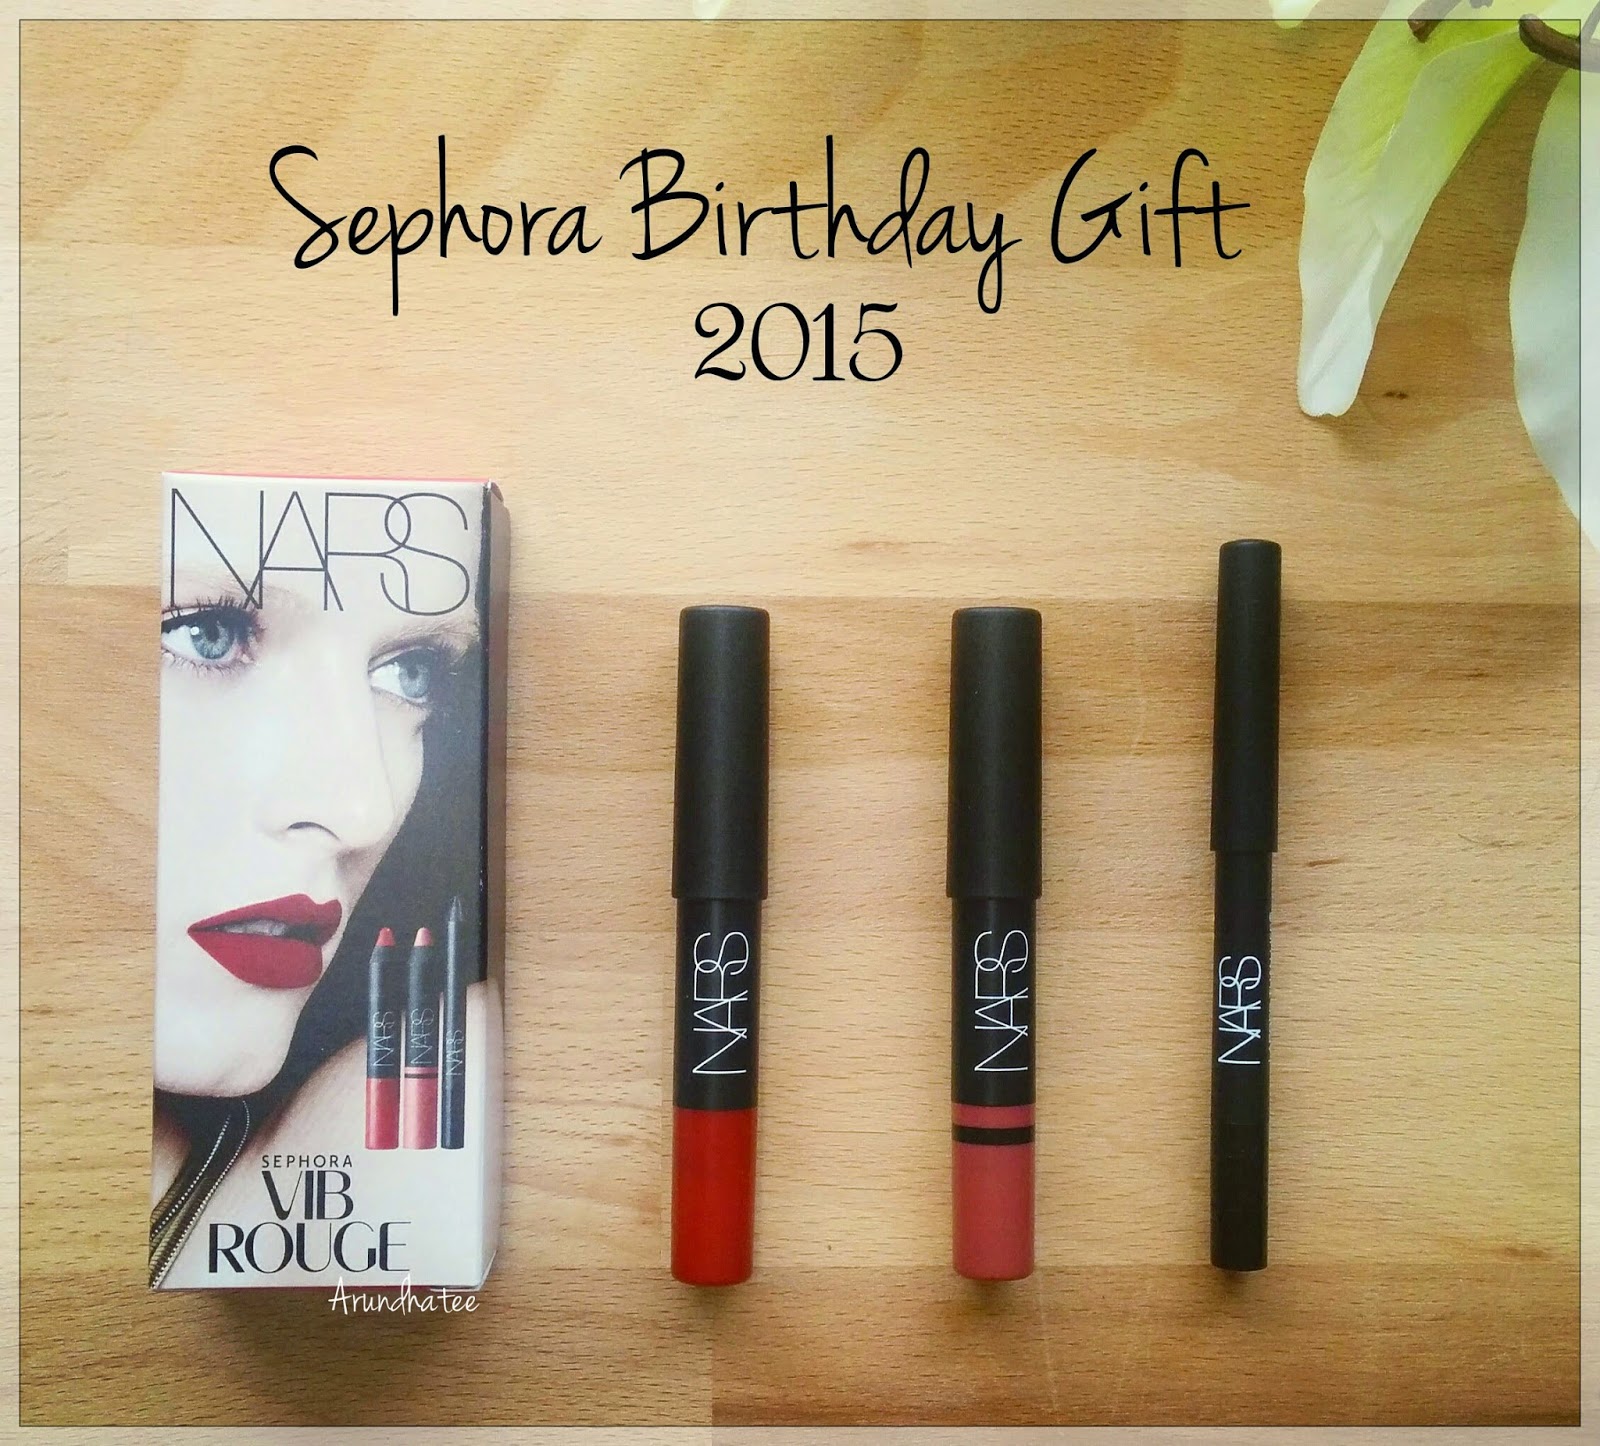 24 Of the Best Ideas for Sephora Birthday Gift Home, Family, Style